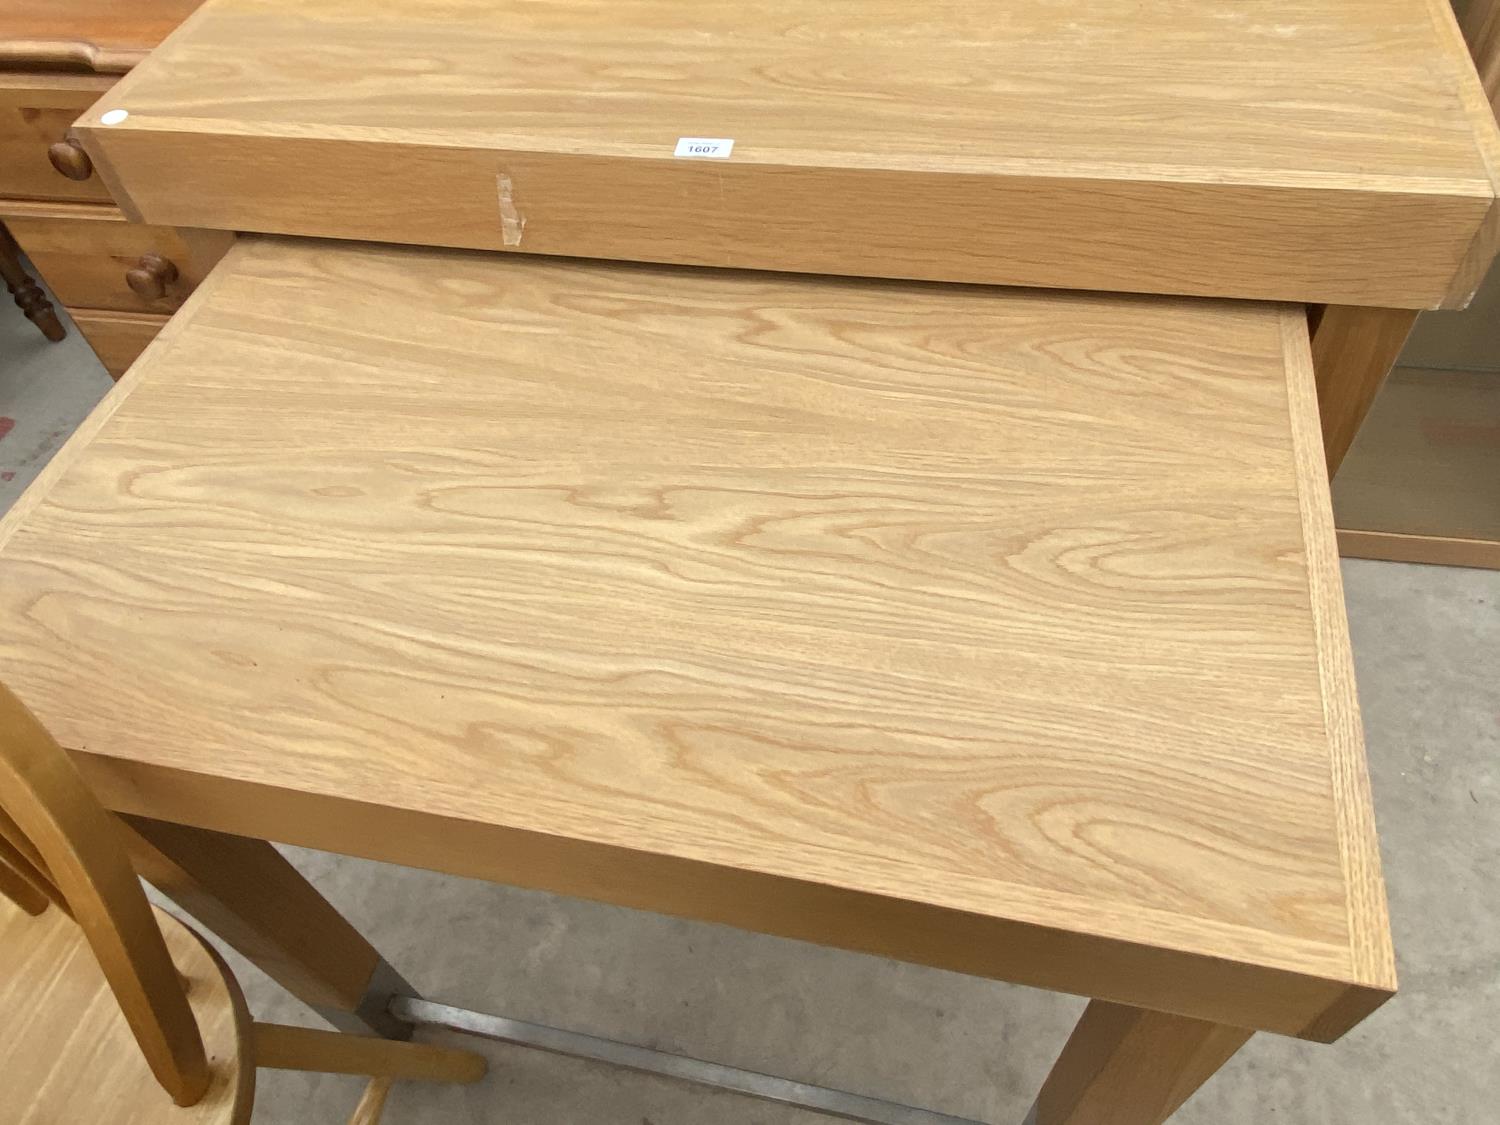 TWO MODERN OAK DINING TABLES WITH METAL STRETCHER RAILS - Image 4 of 4